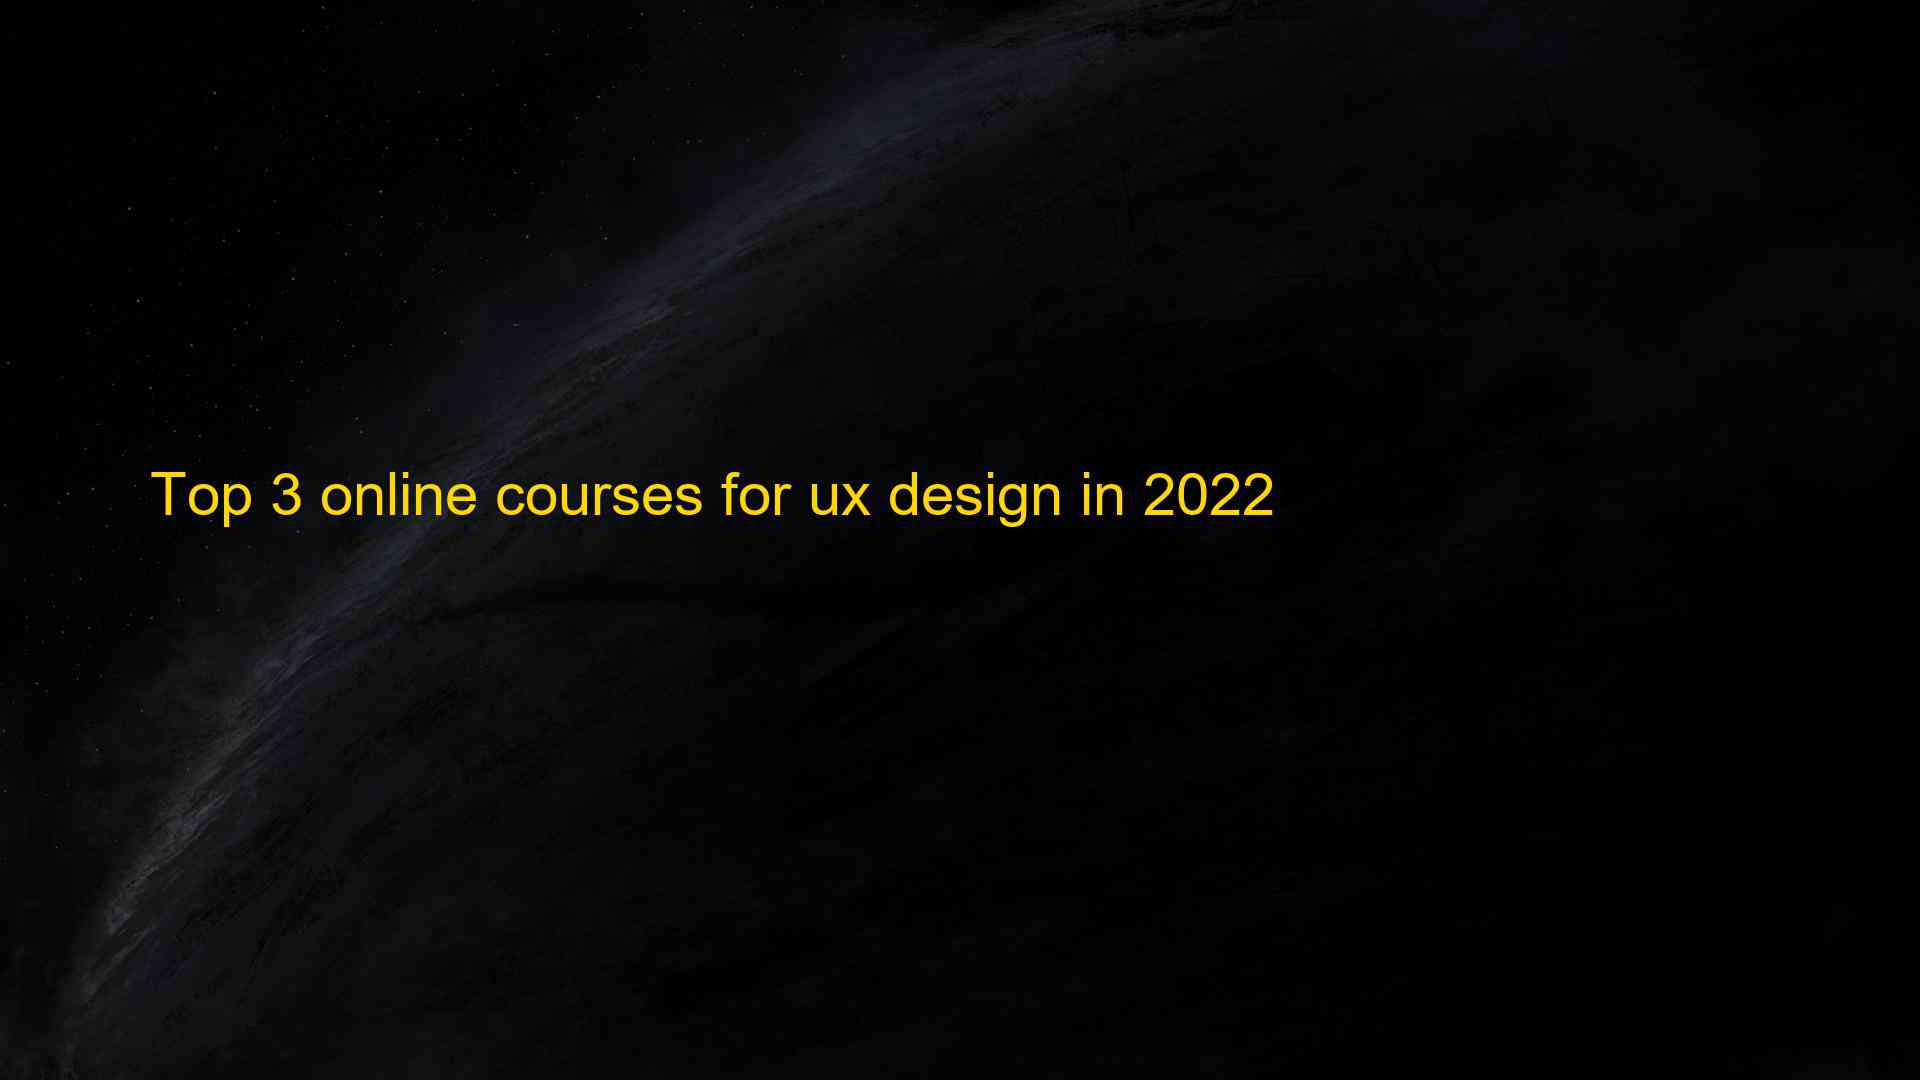 Top 3 online courses for ux design in 2022 1661927640